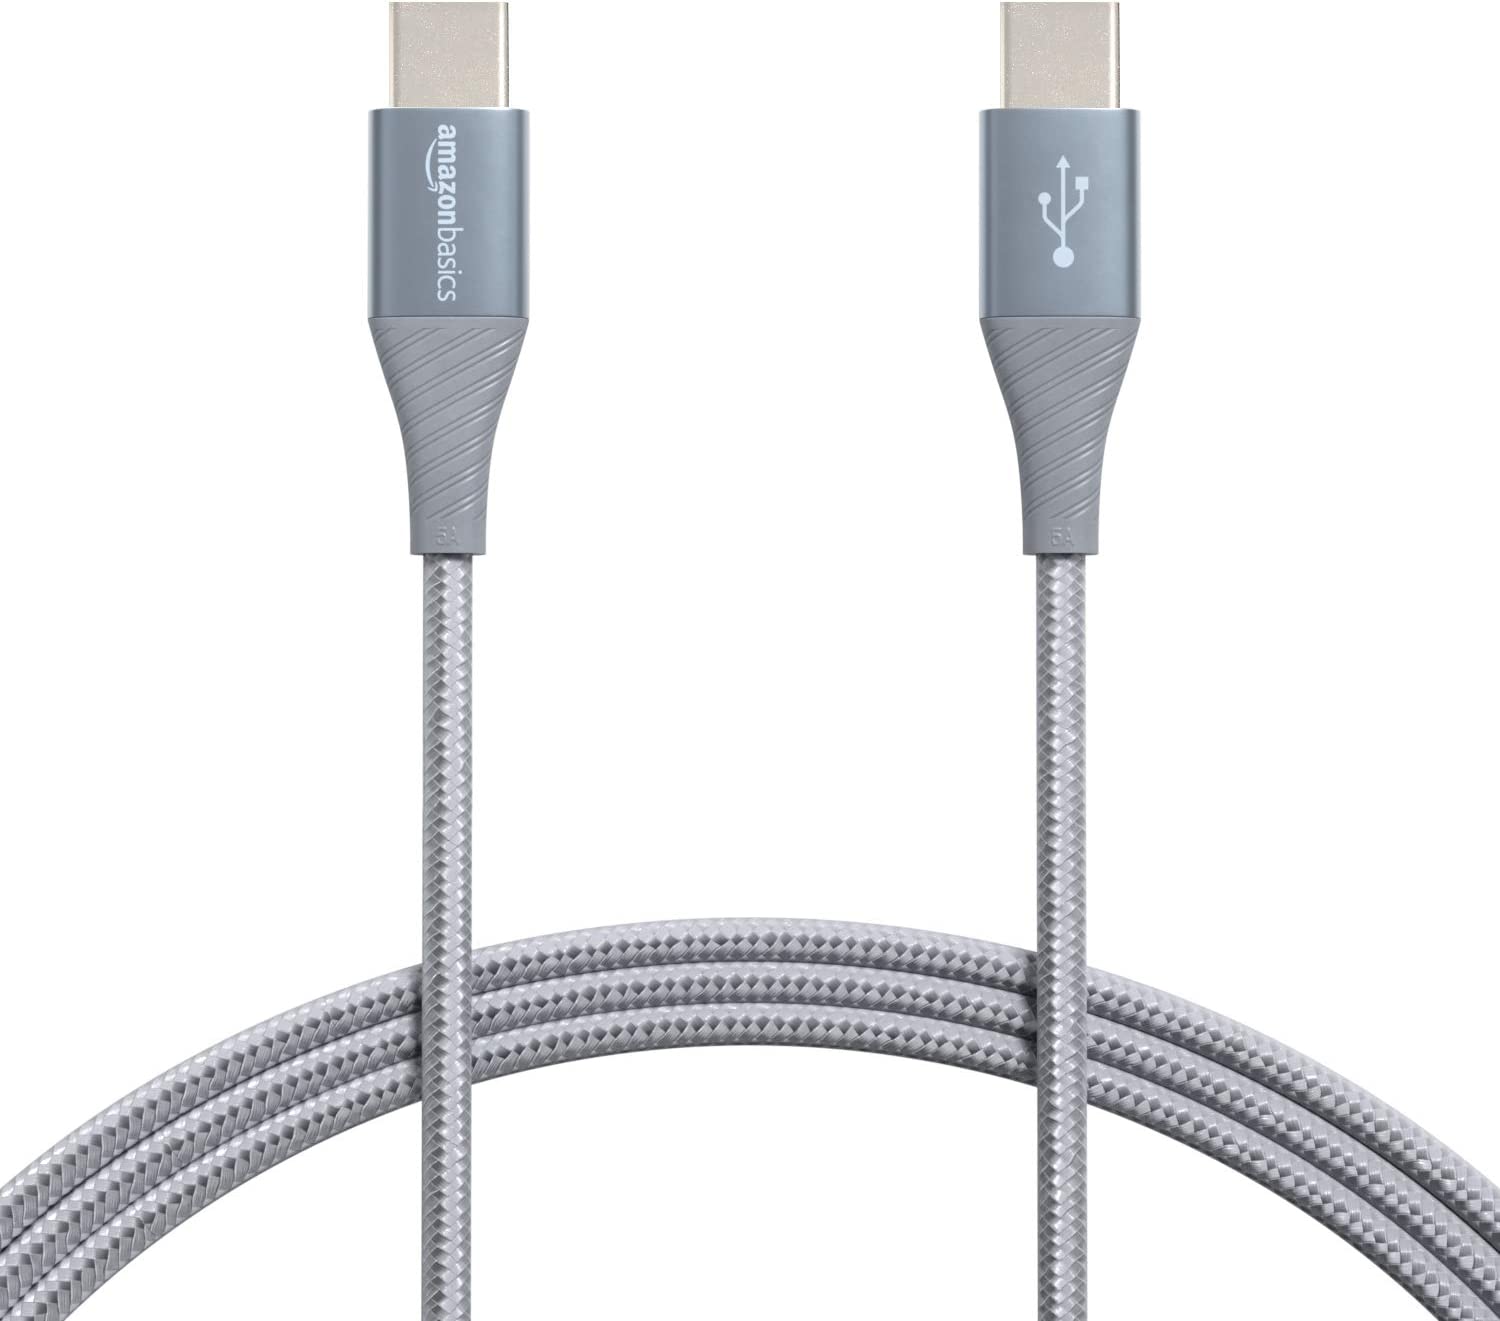 Finest USB-C cables 2023: Get high quality charging and information transfers